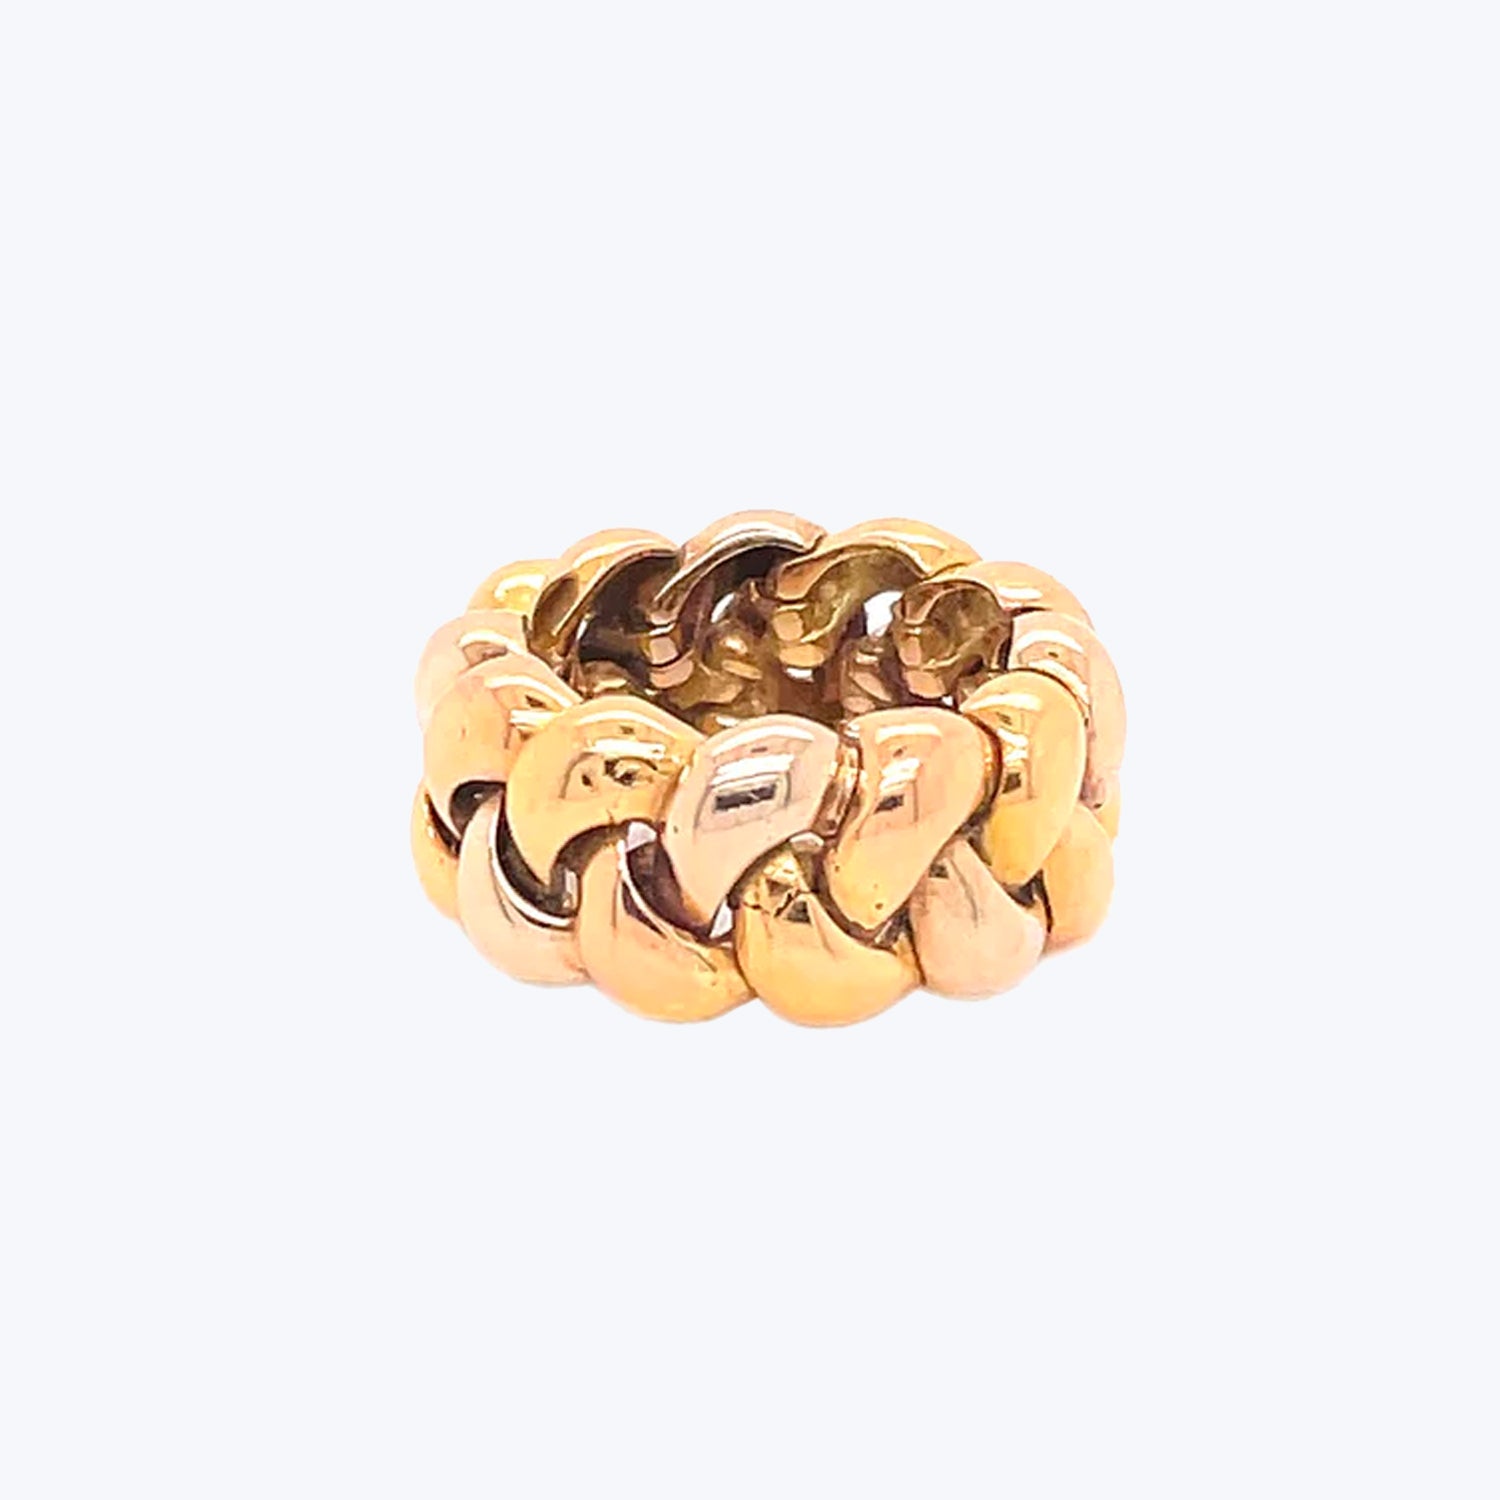 Gold ring with chunky, textured design and interlocking rounded links.